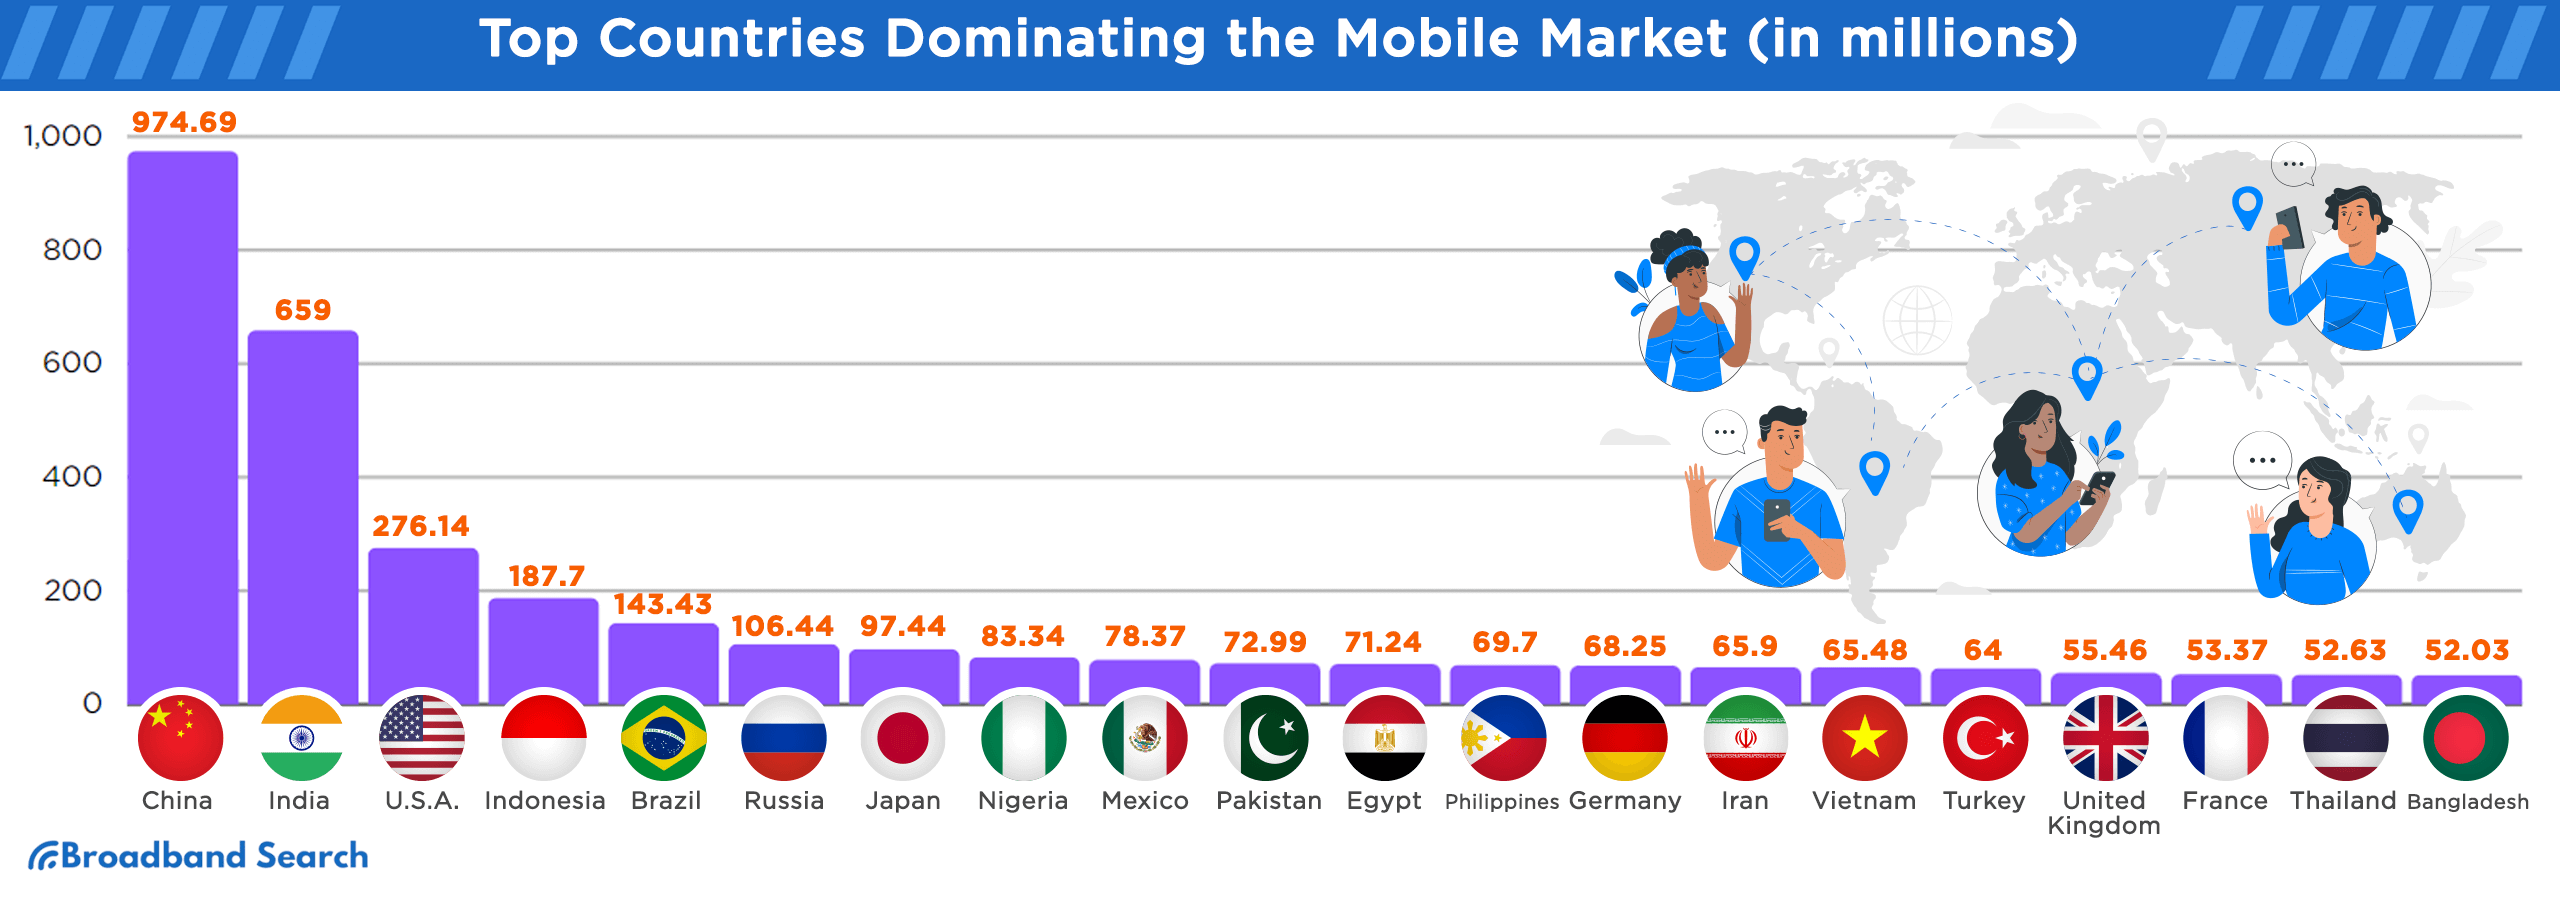 Top Countries dominating the mobile market where numbers are shown in the millions